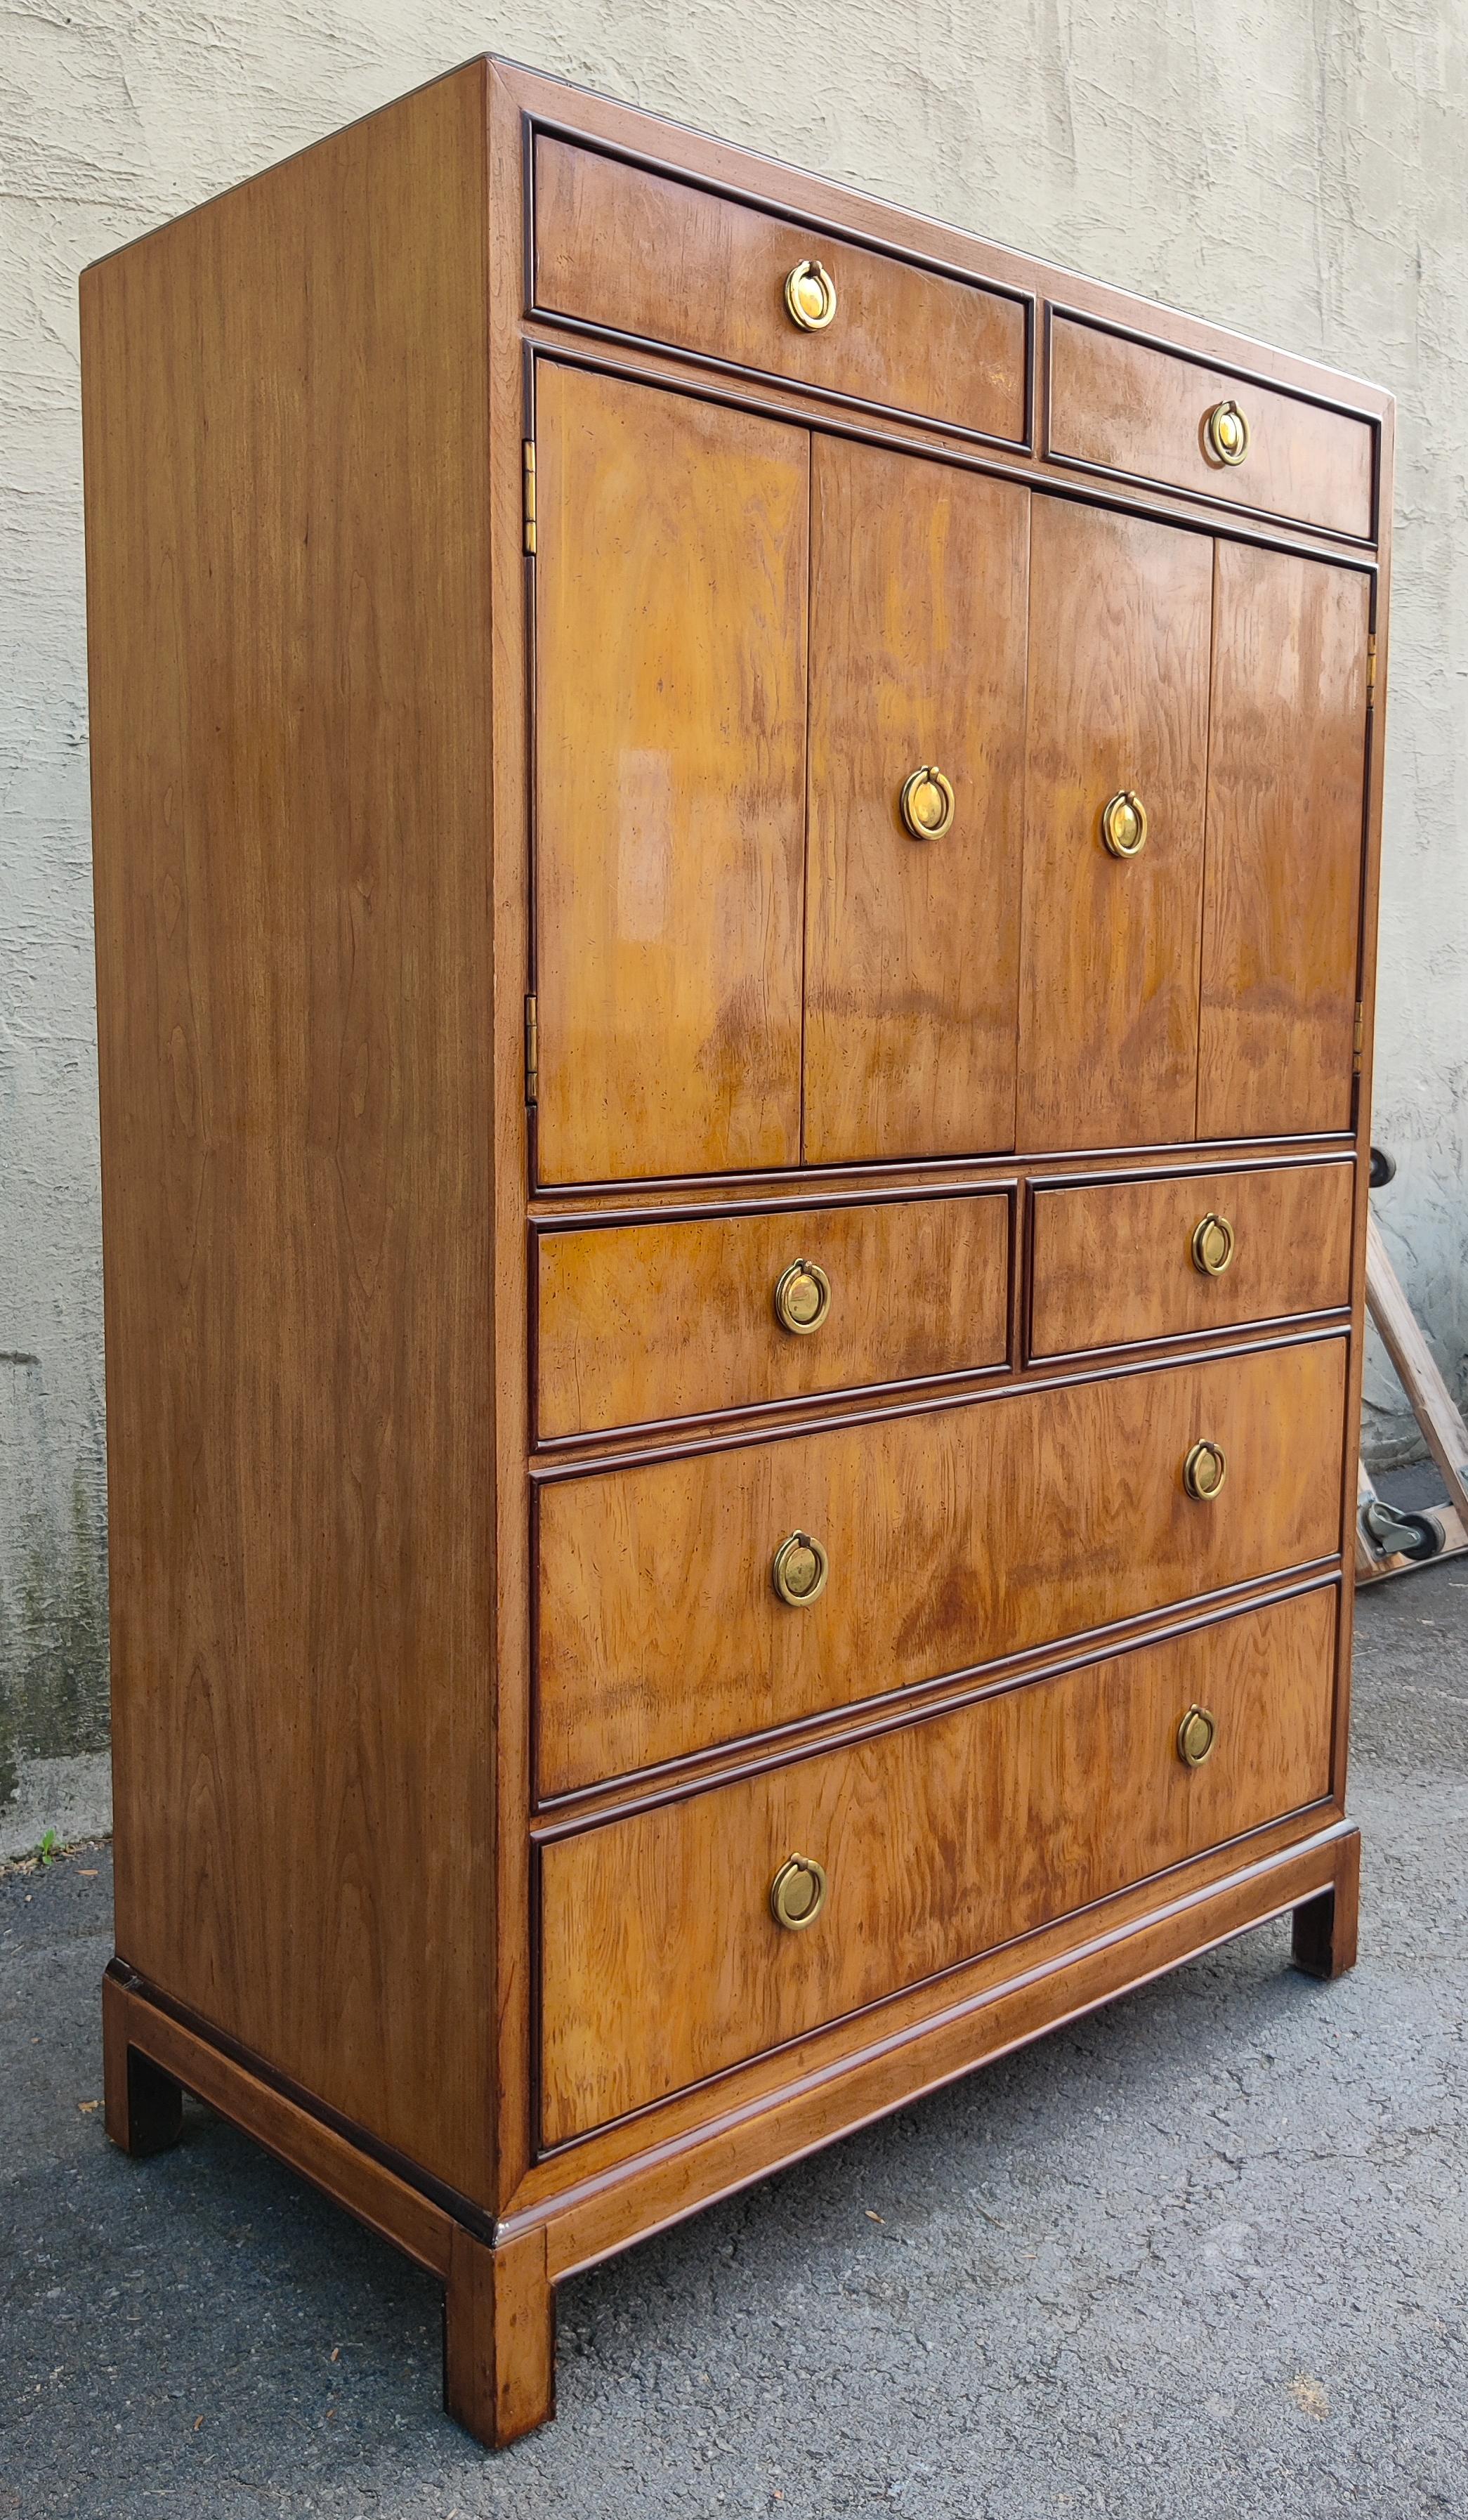 This beautiful gentleman's chest or tall dresser was made in the 1970s by Drexel Heritage for their 